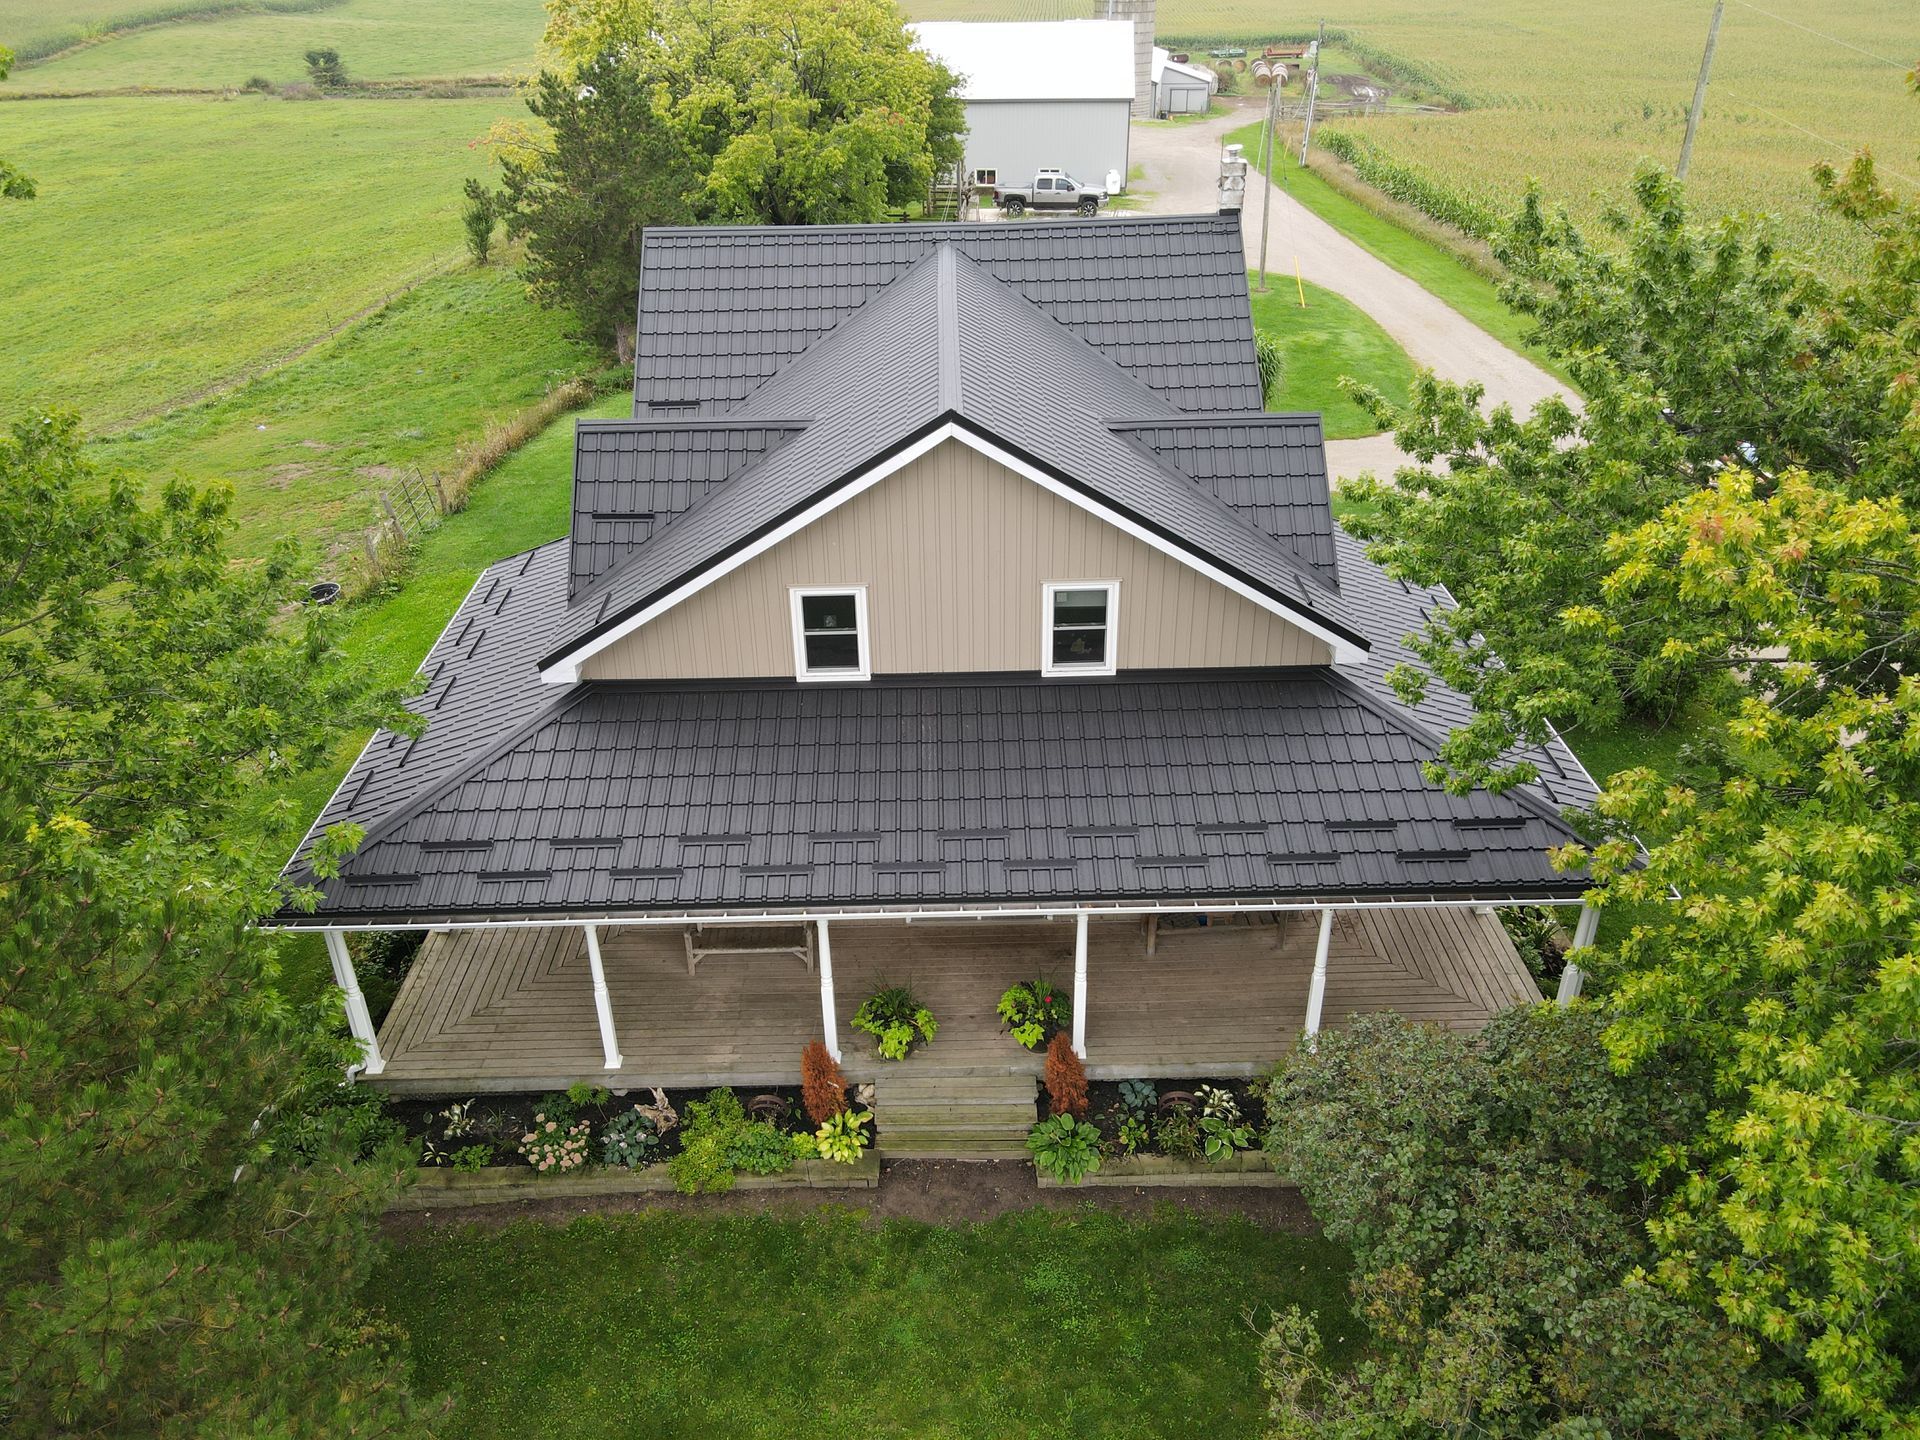 An aerial view of a house with a black roof and a porch surrounded by trees.